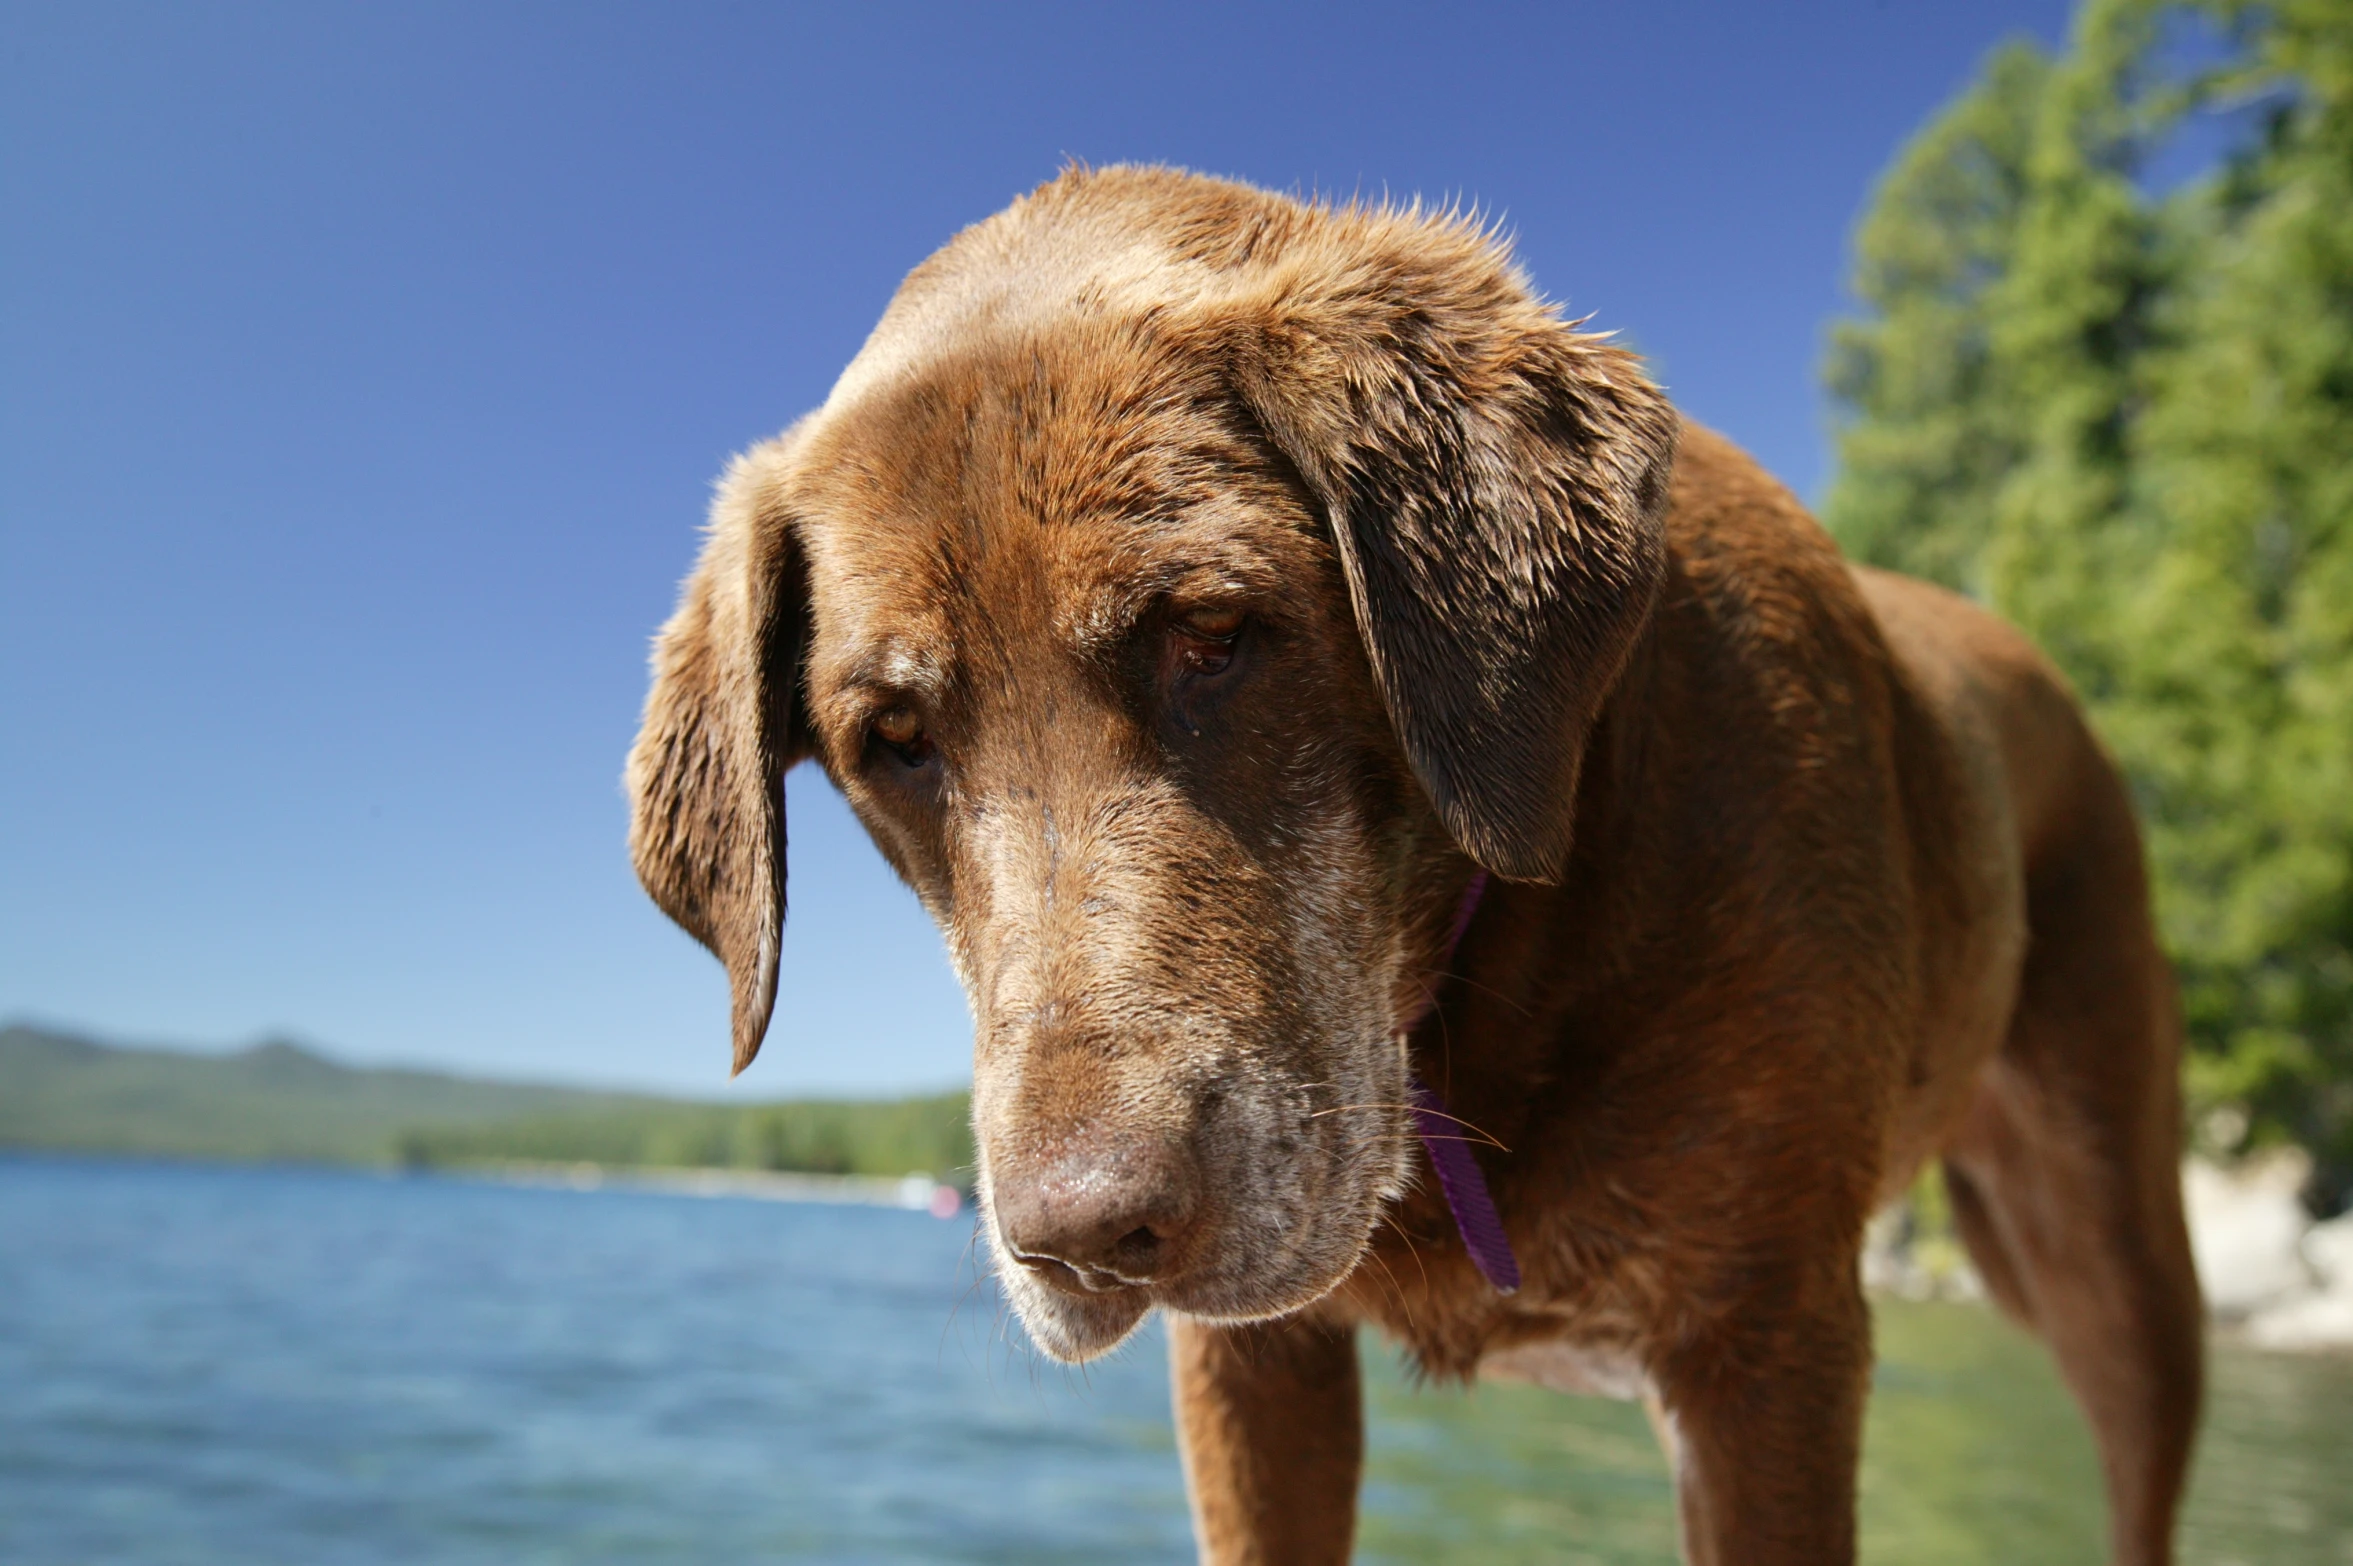 a brown dog with a blue collar stands by the water